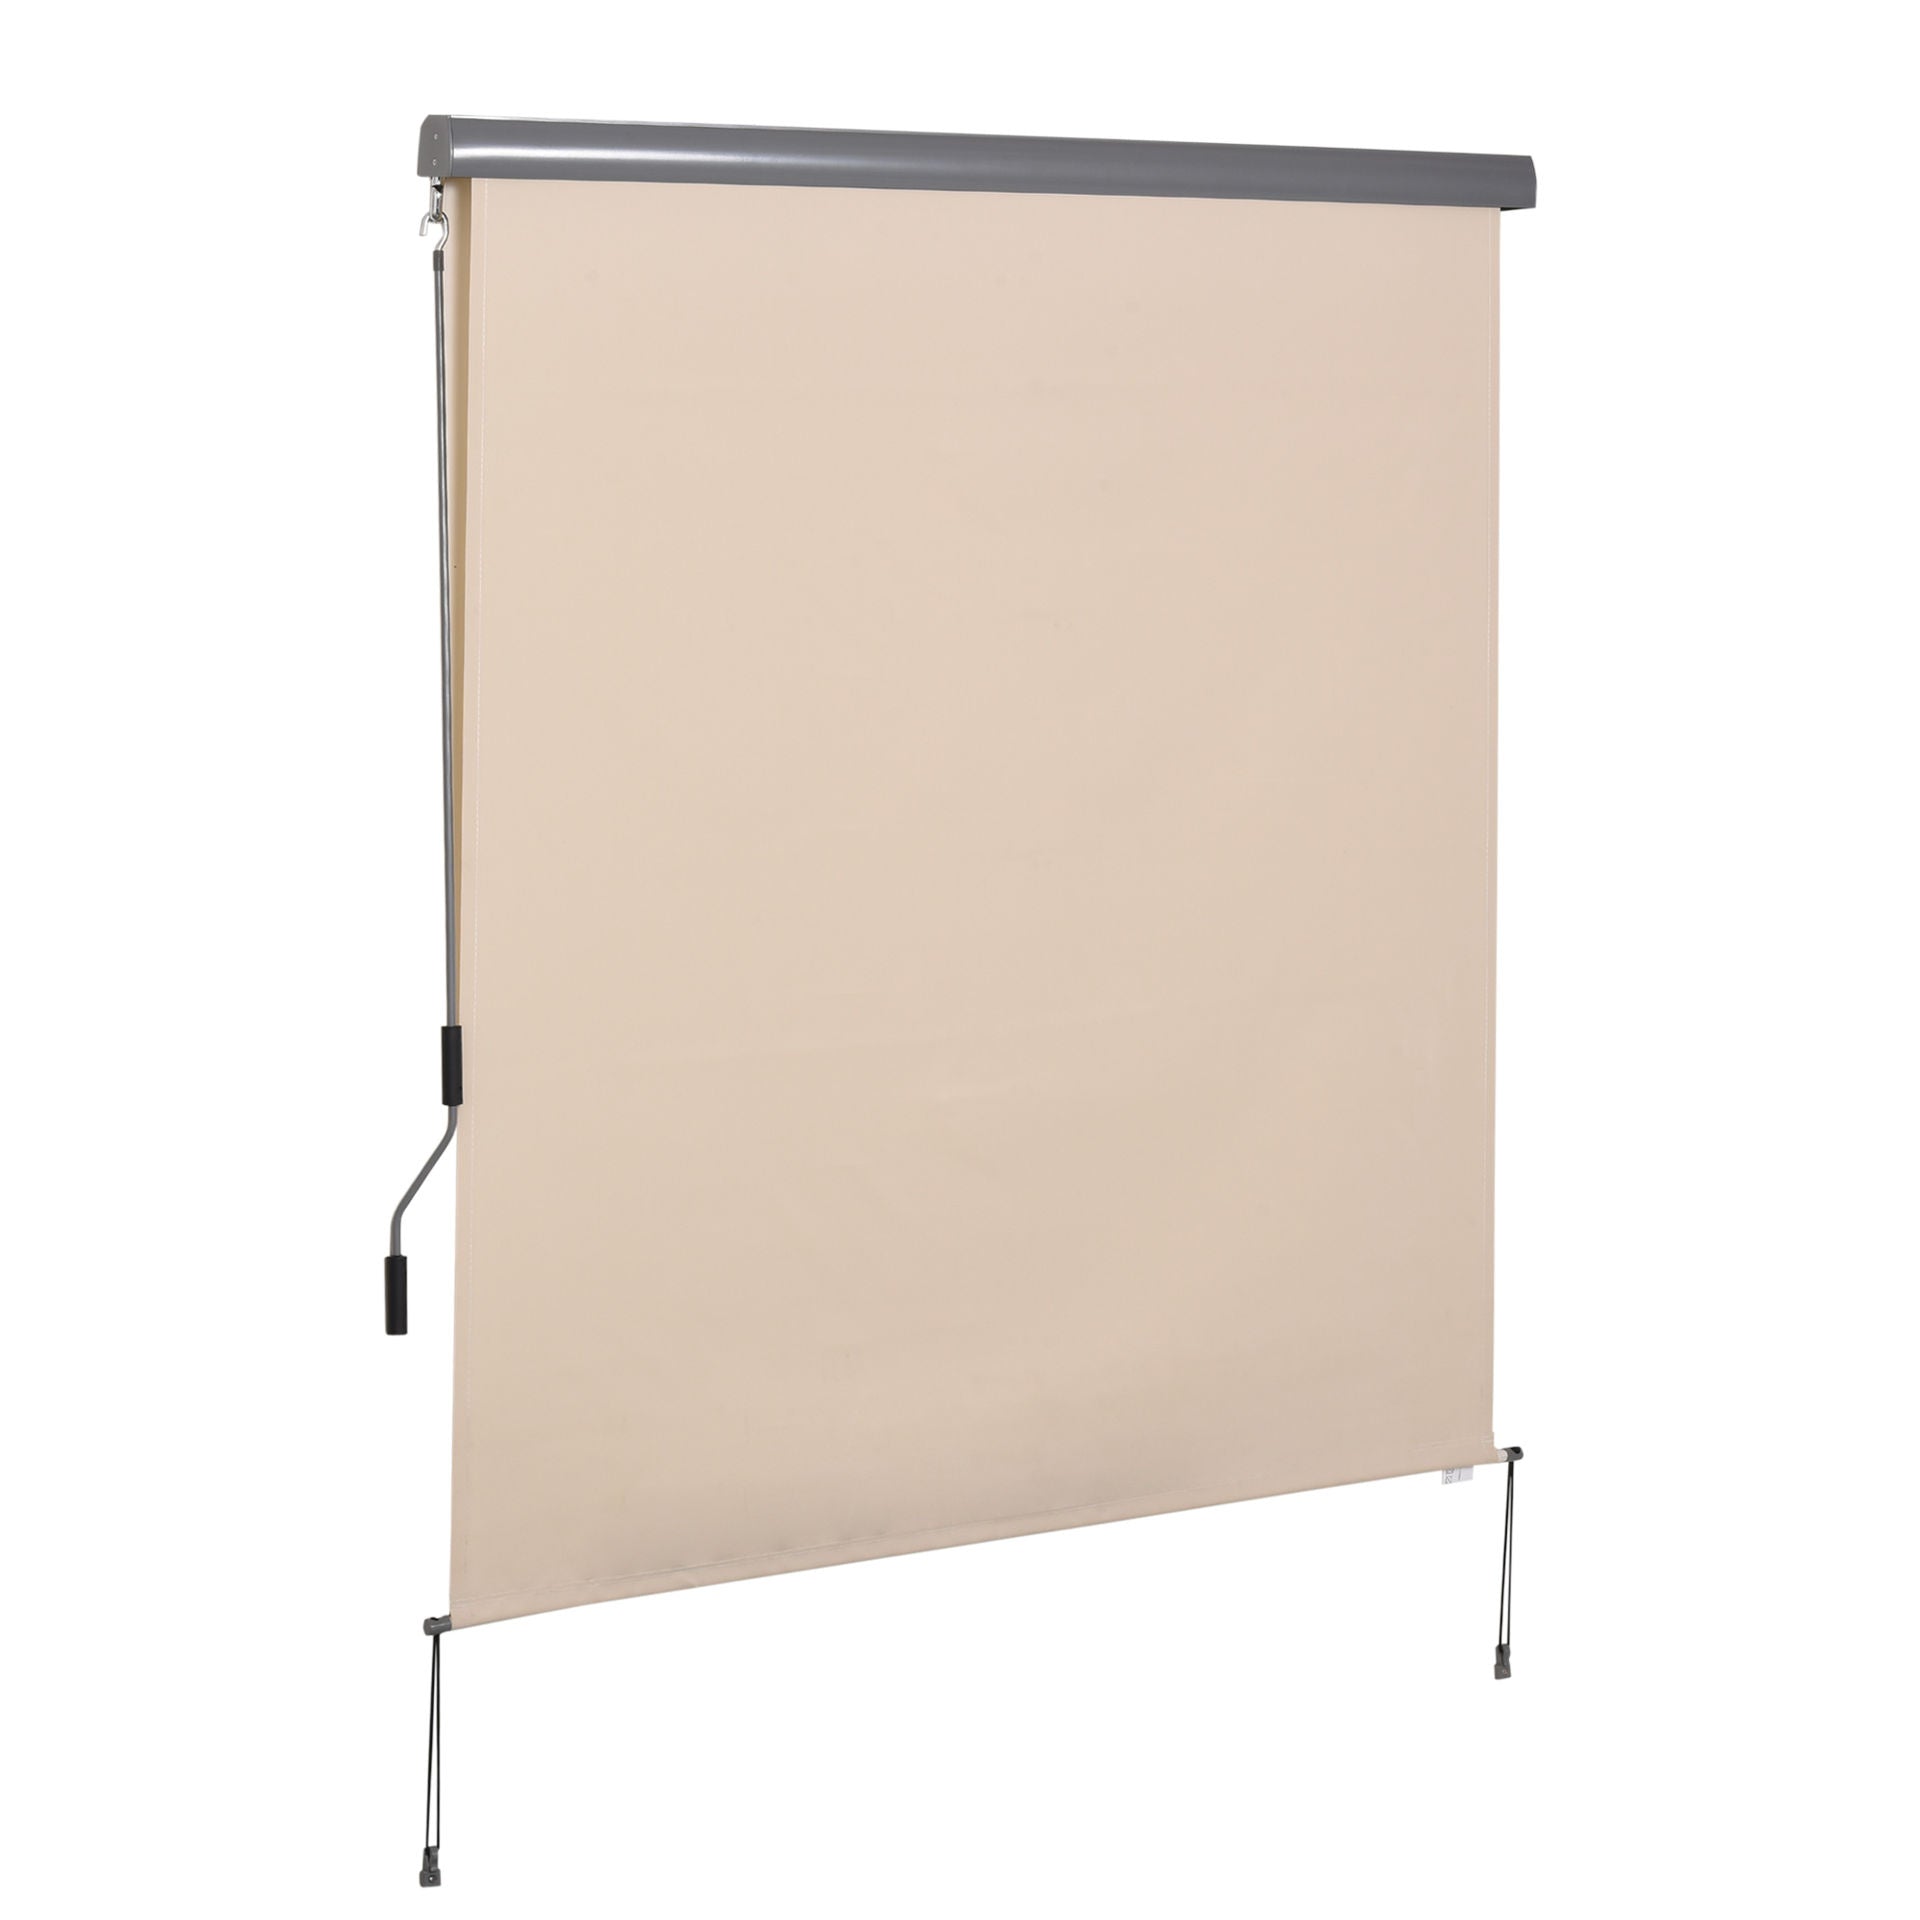 Nancy's Hill View Vertical Awning Aluminum with Hand Crank - White - Aluminum, Polyester - cm x 62.99 cm x 98.42 cm